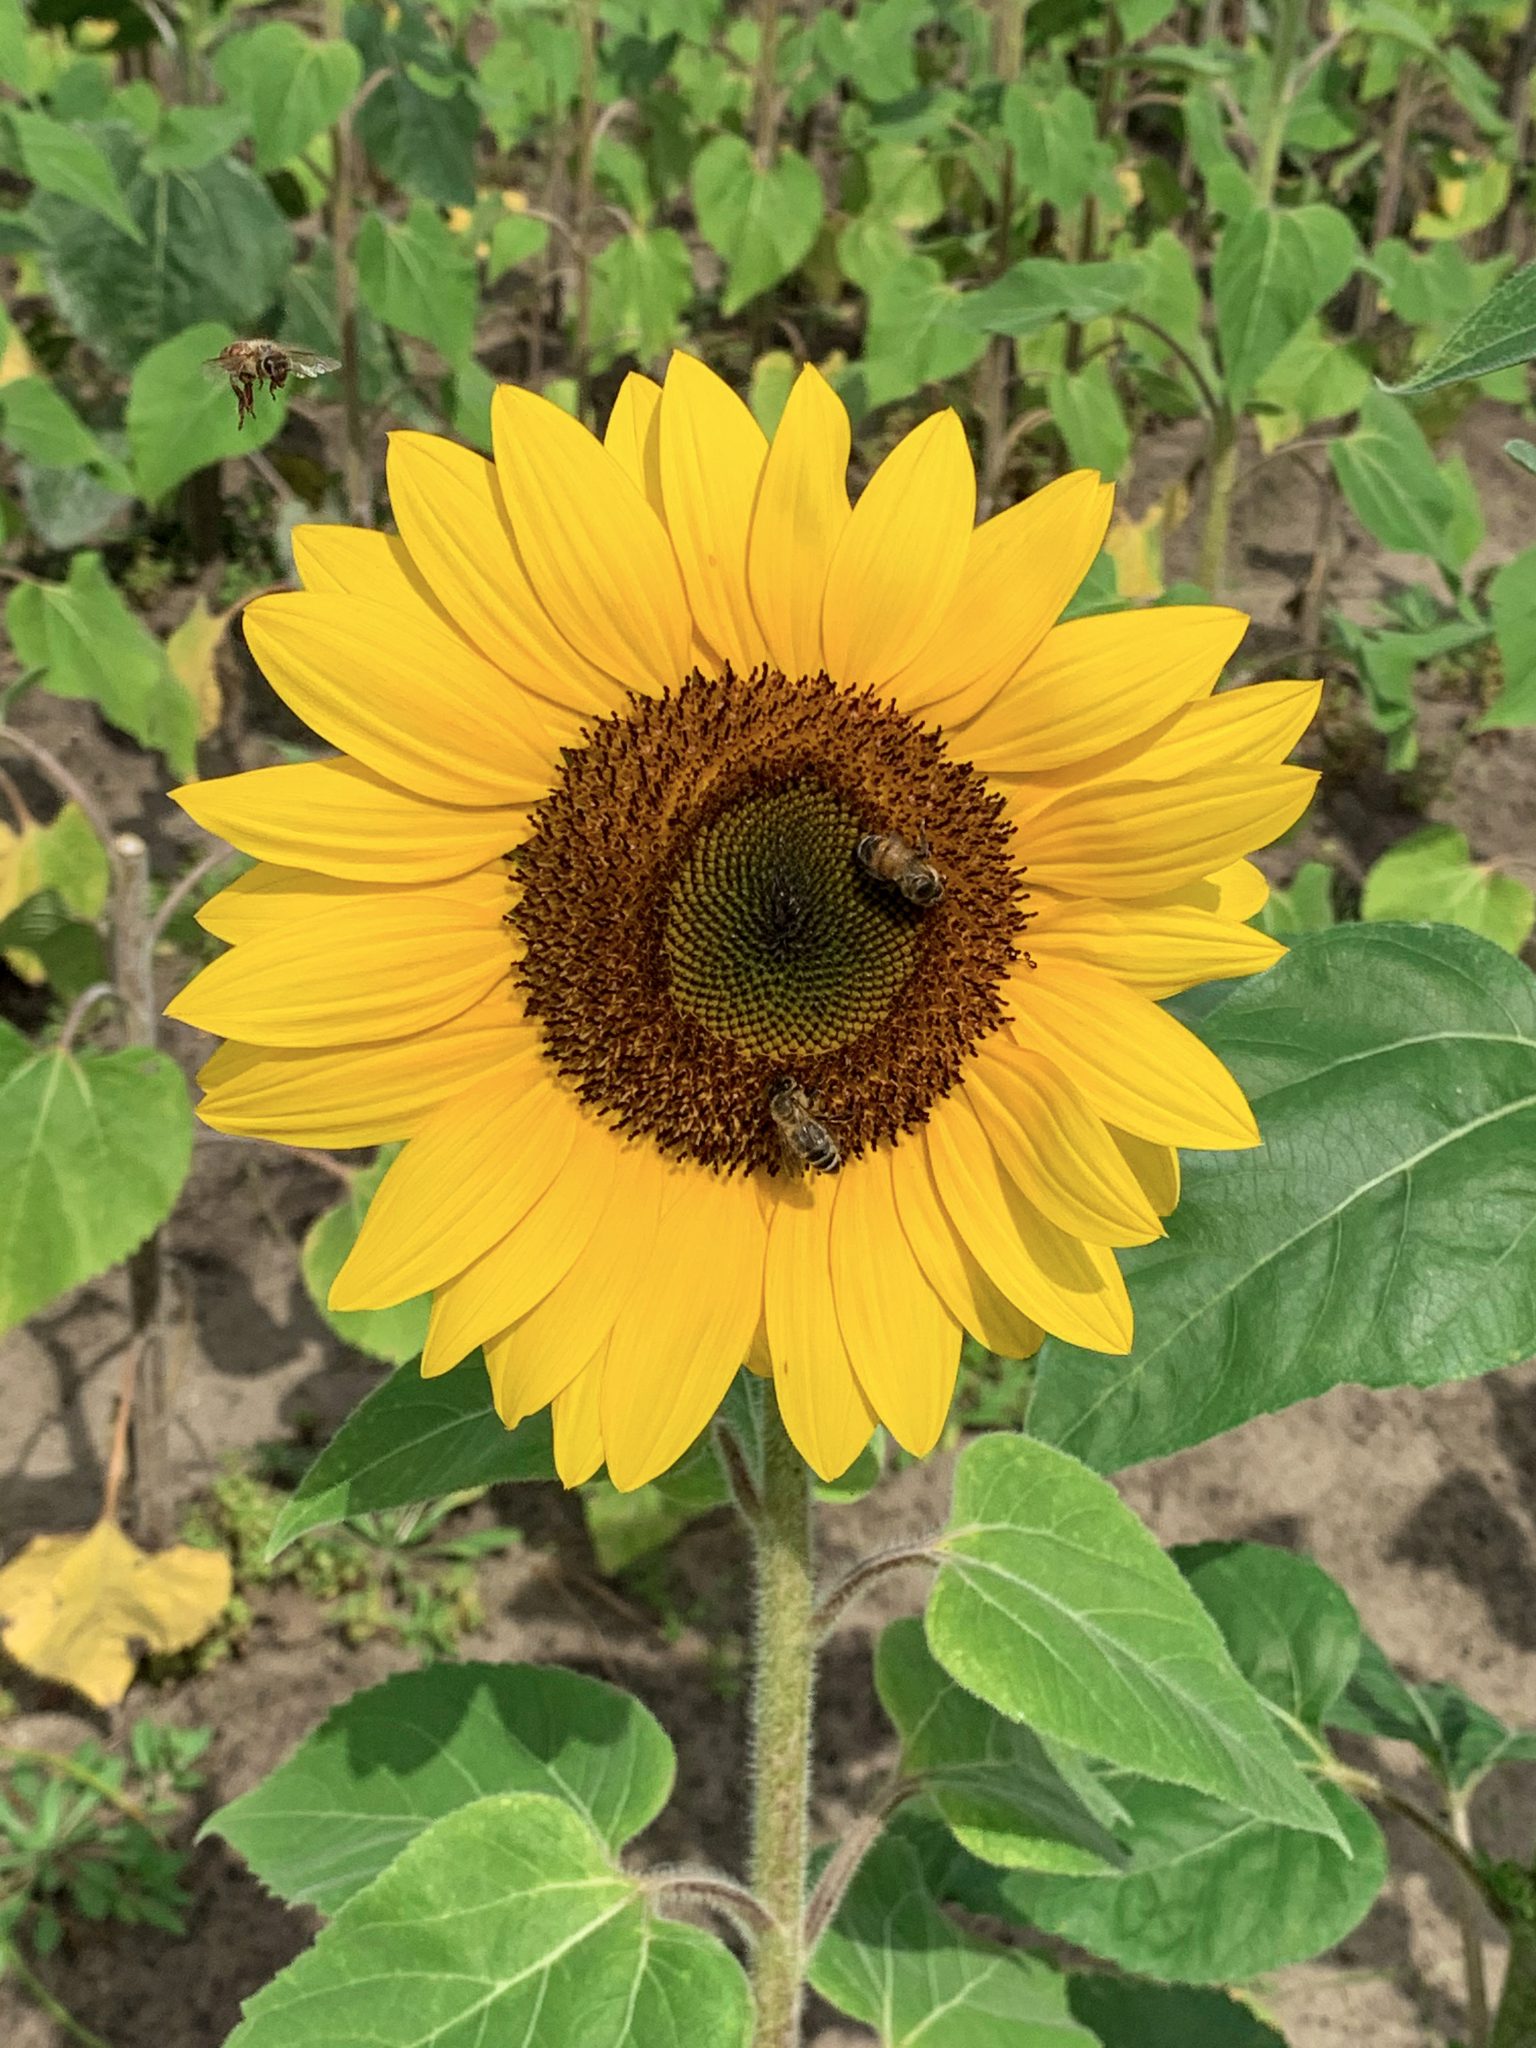 Sunflower with bees on it, including one flying to it